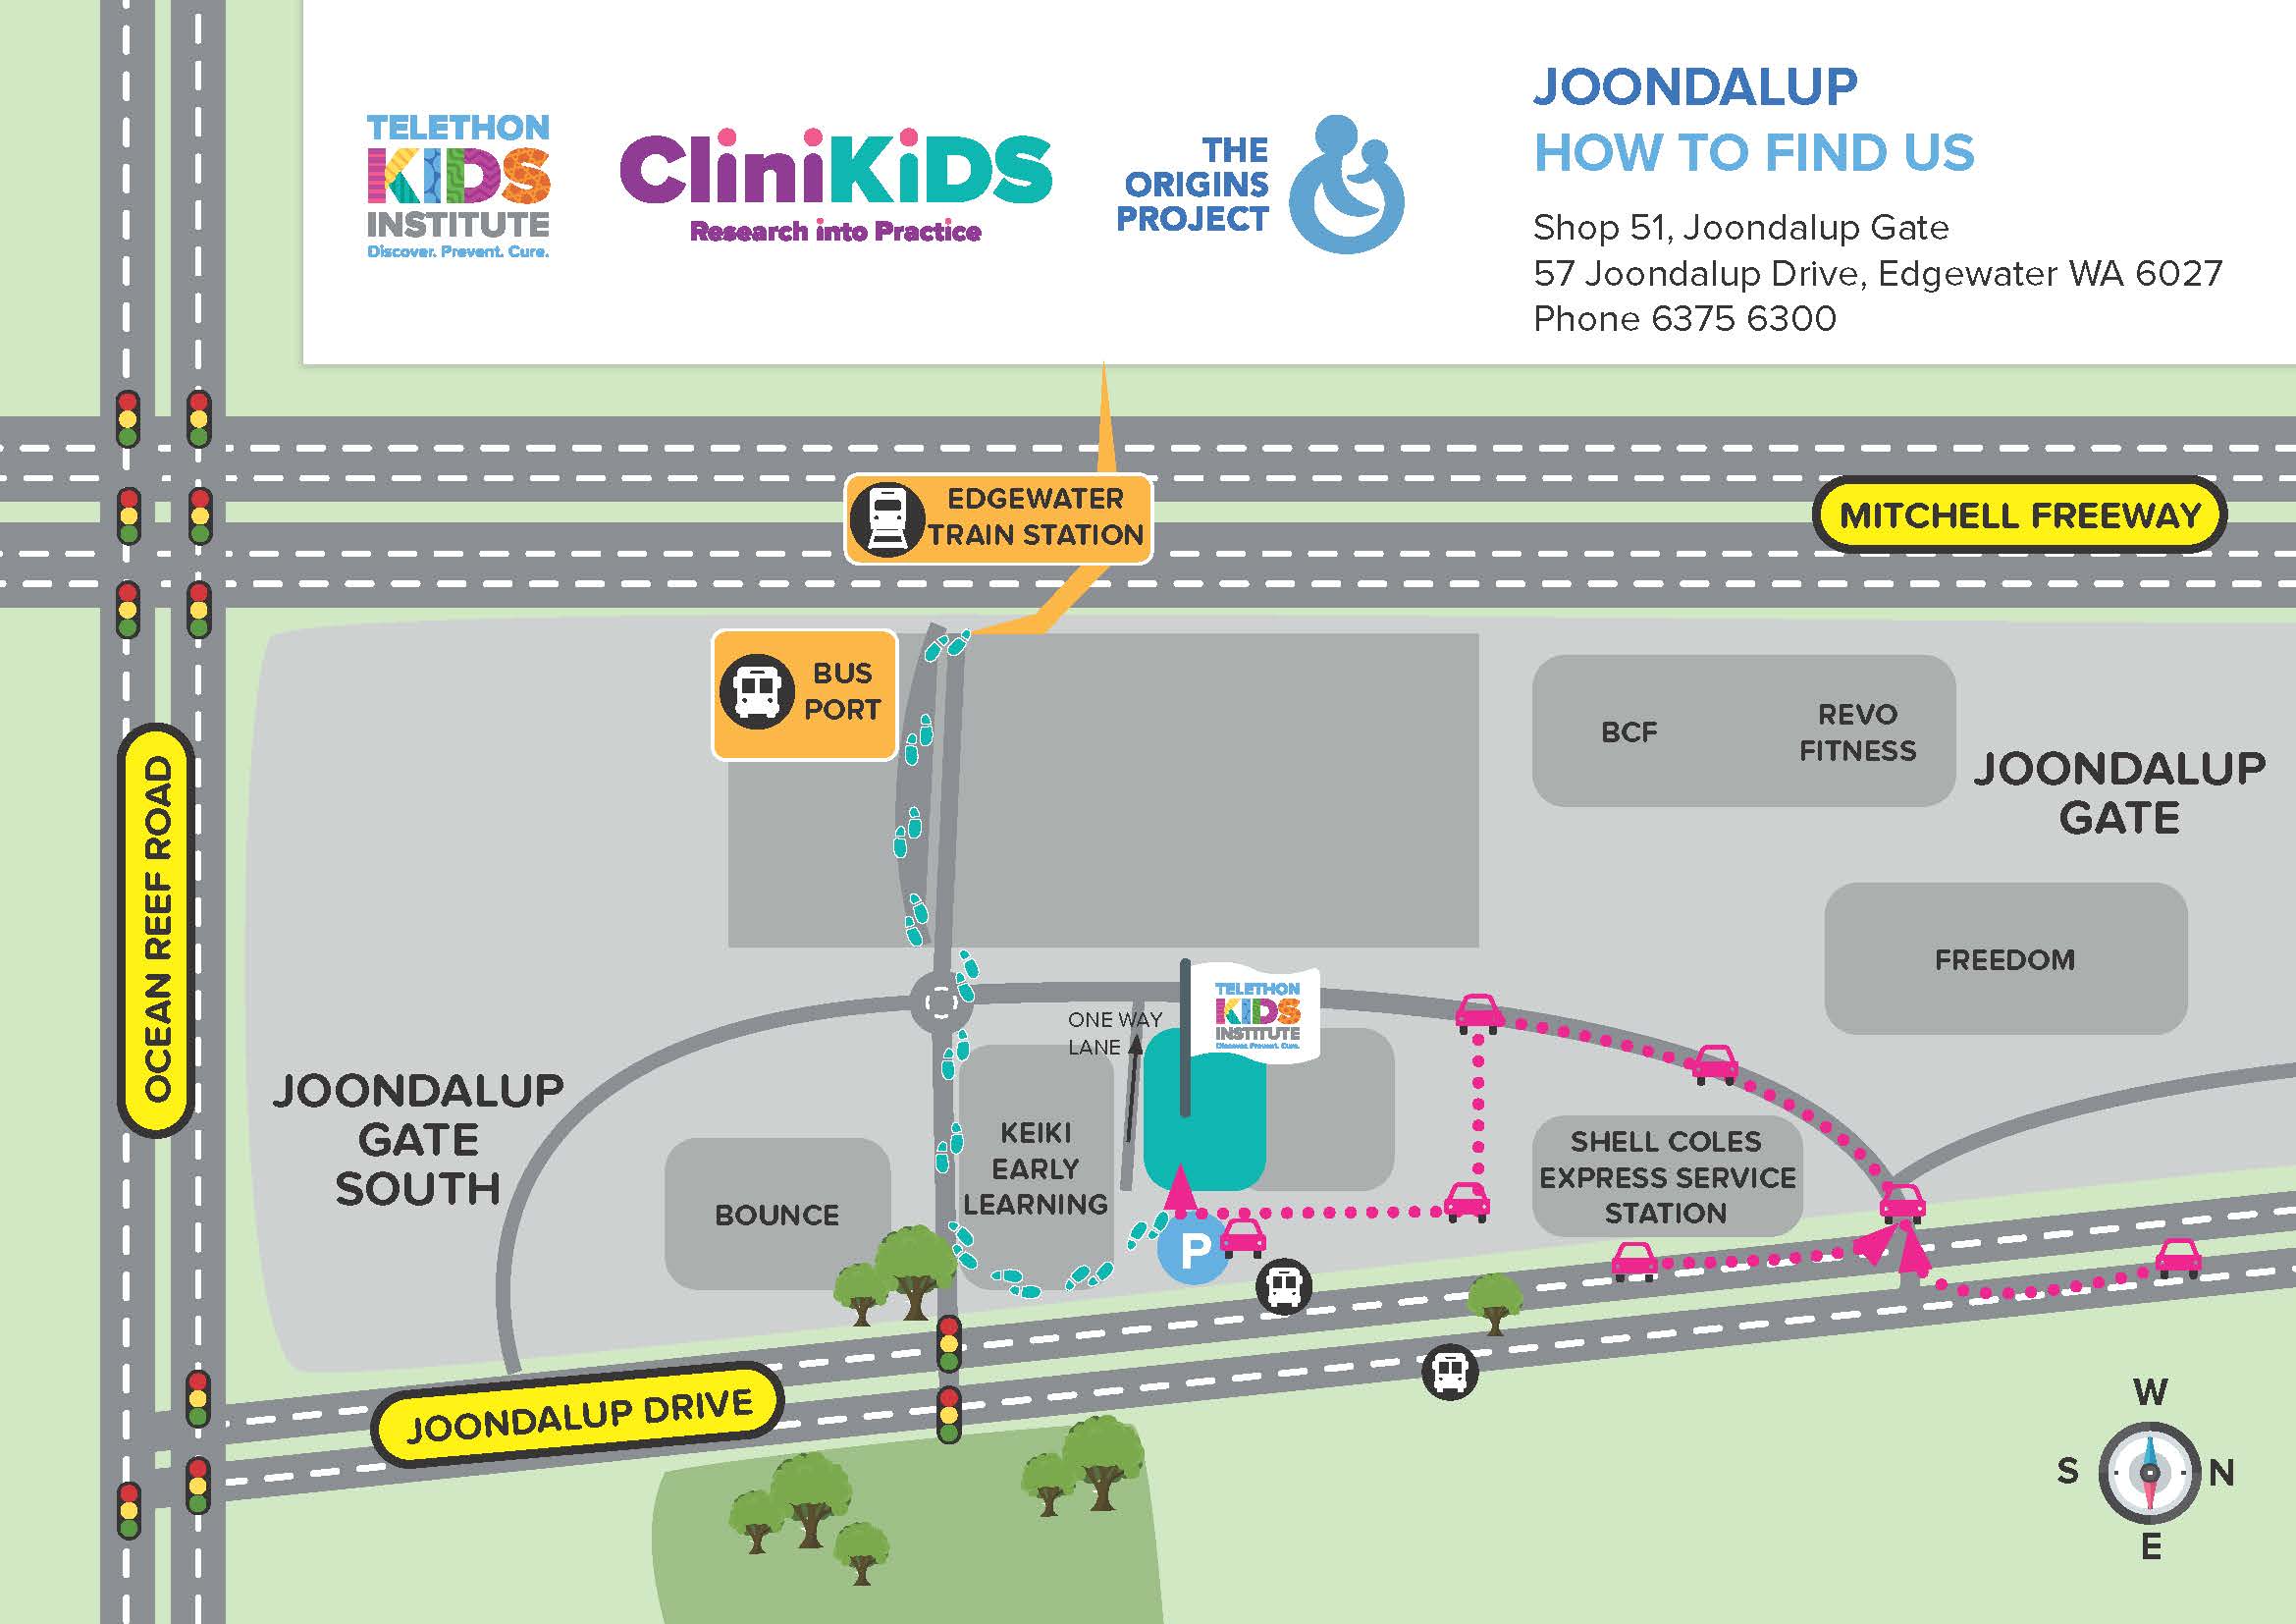 Telethon Kids Institute Joondalup site map - families